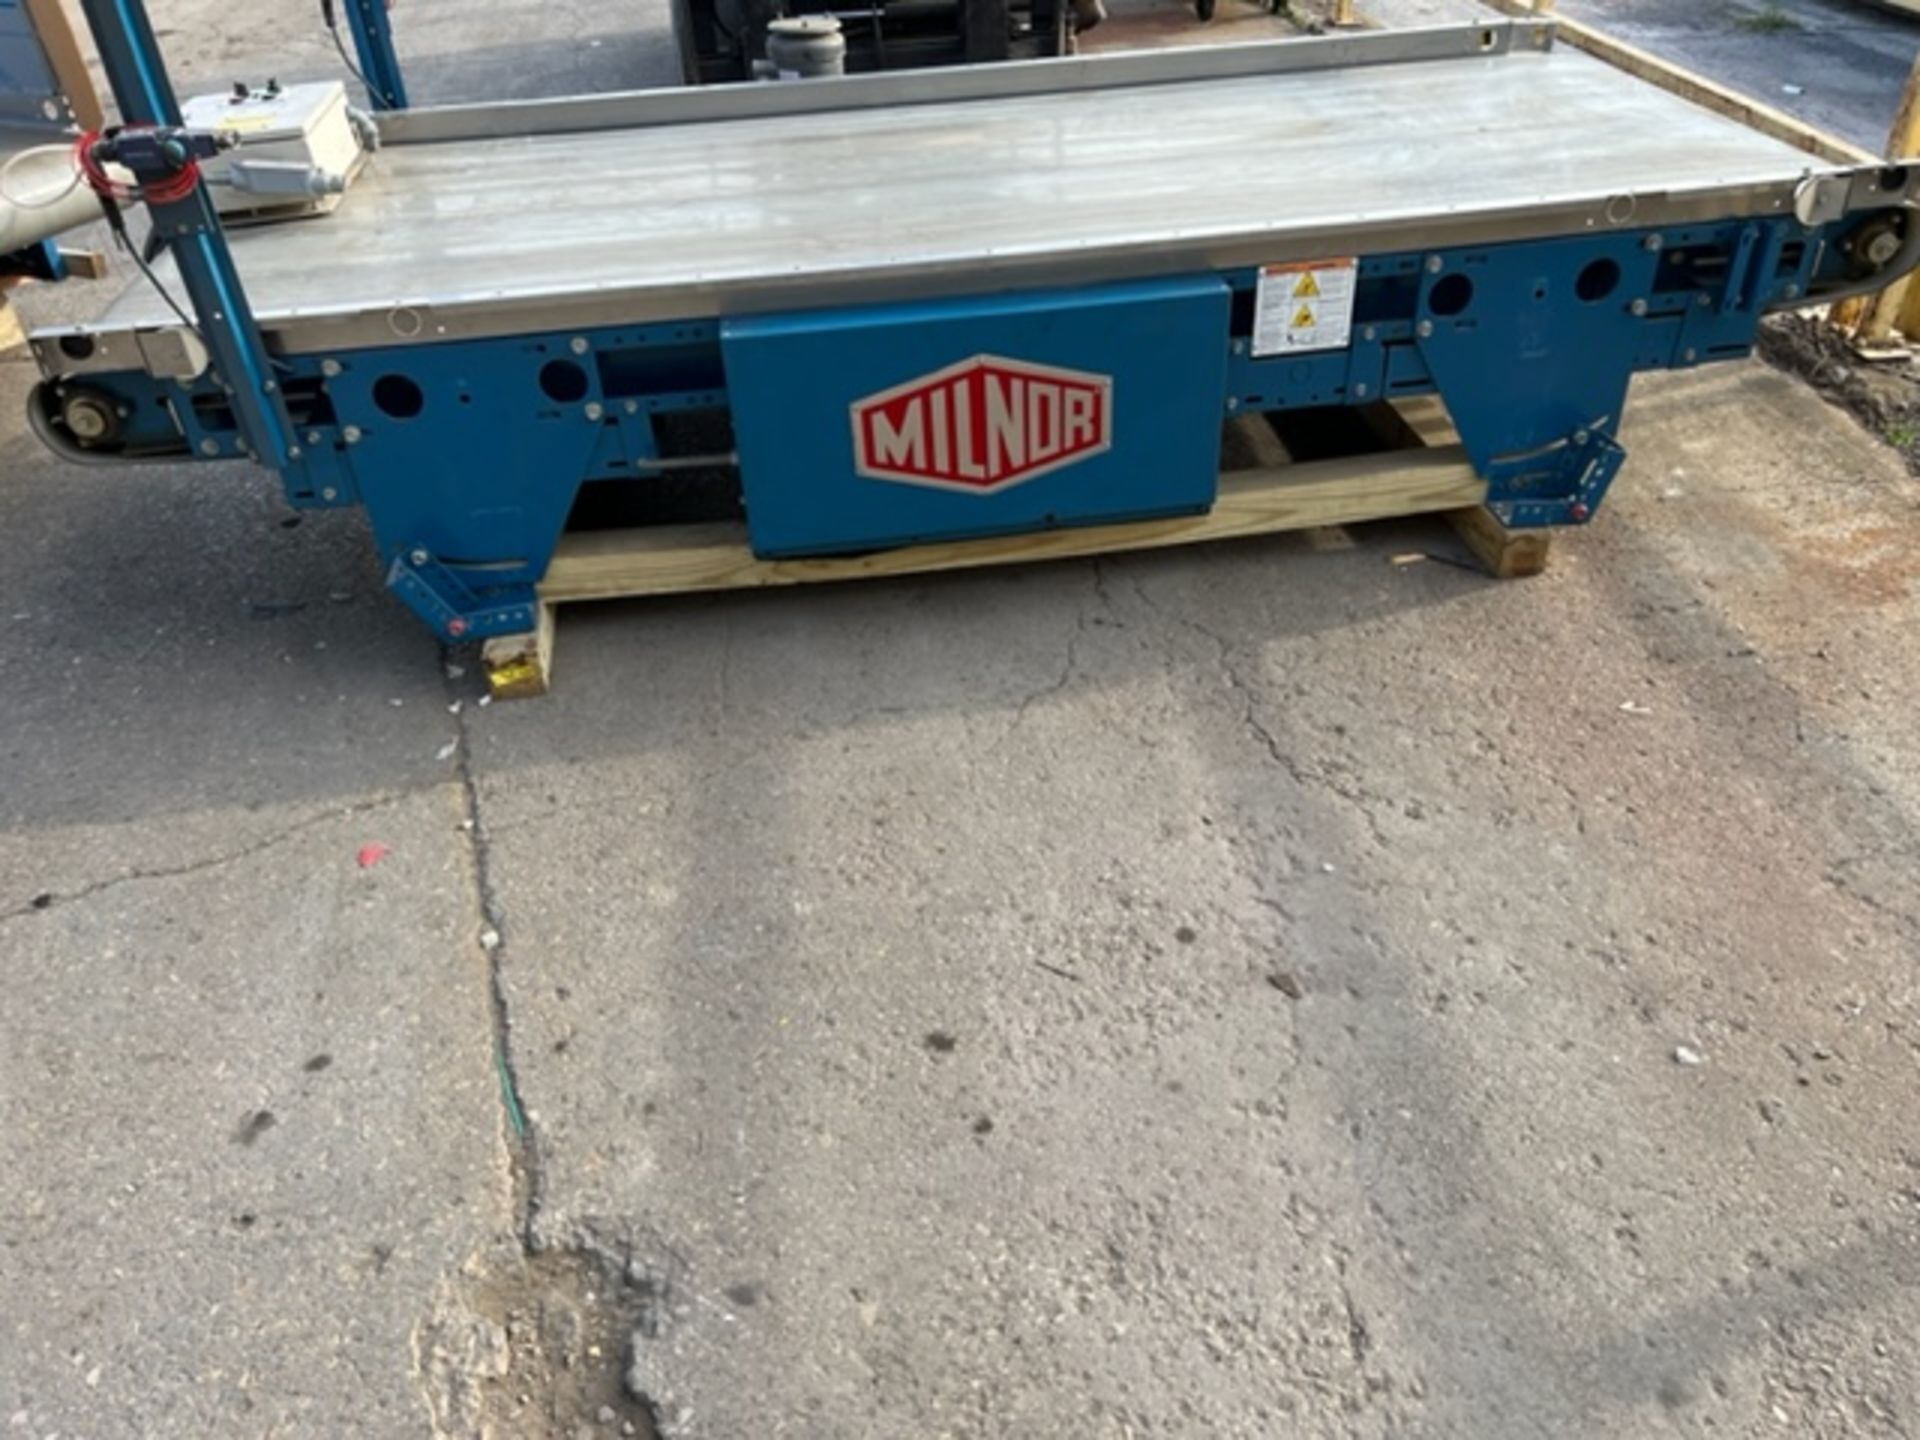 Lot of 2 (2 units) 120" x 48" Milnor Power Conveyors - new in 2018 MINT UNITS never used - Image 3 of 5